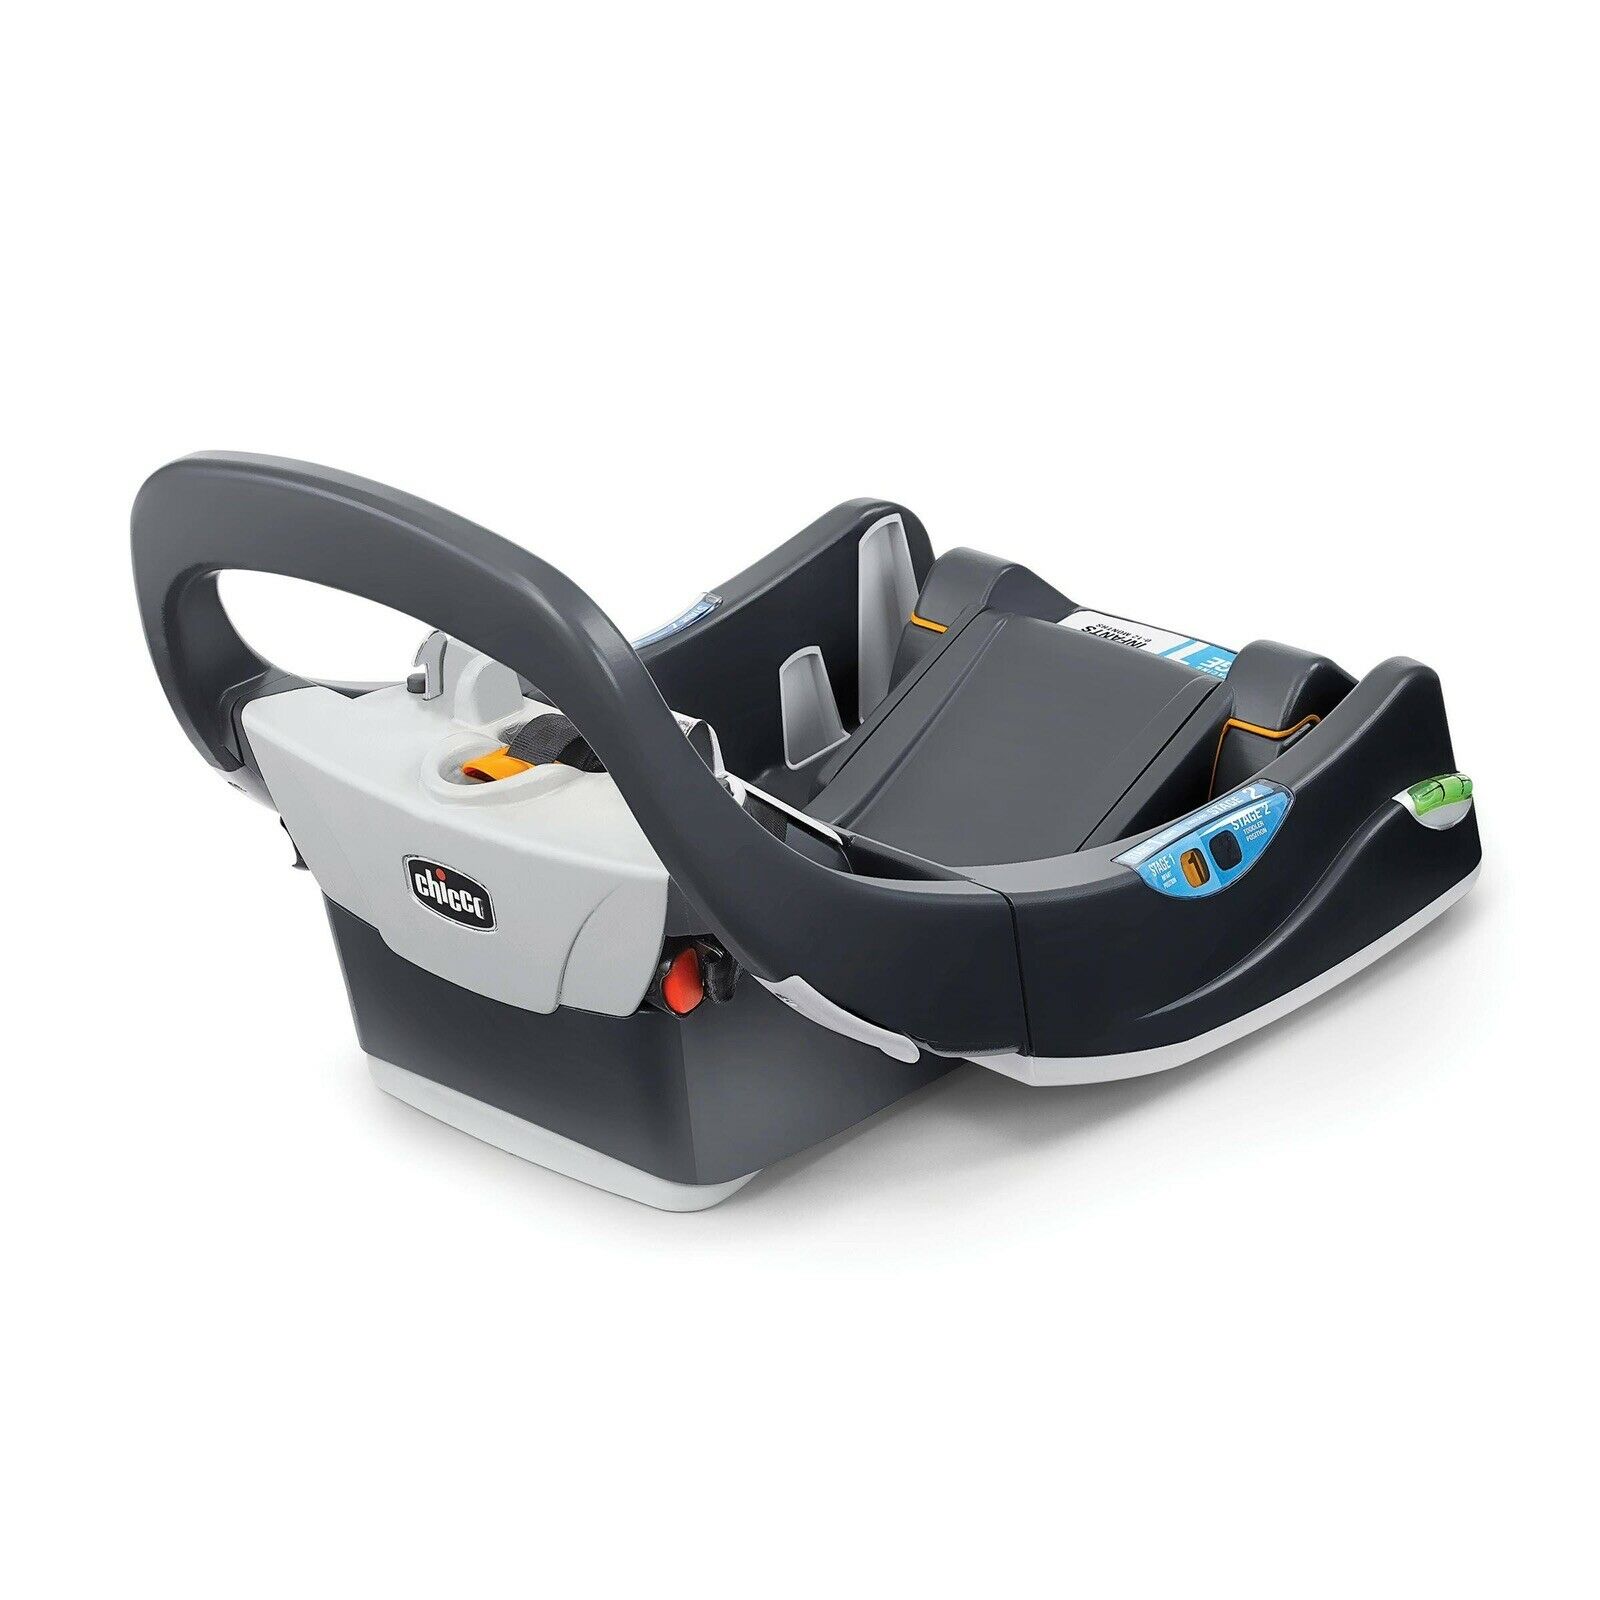 Chicco Fit2 Infant & Toddler 2-stage Position Car Seat Base Only - Exp 10/26